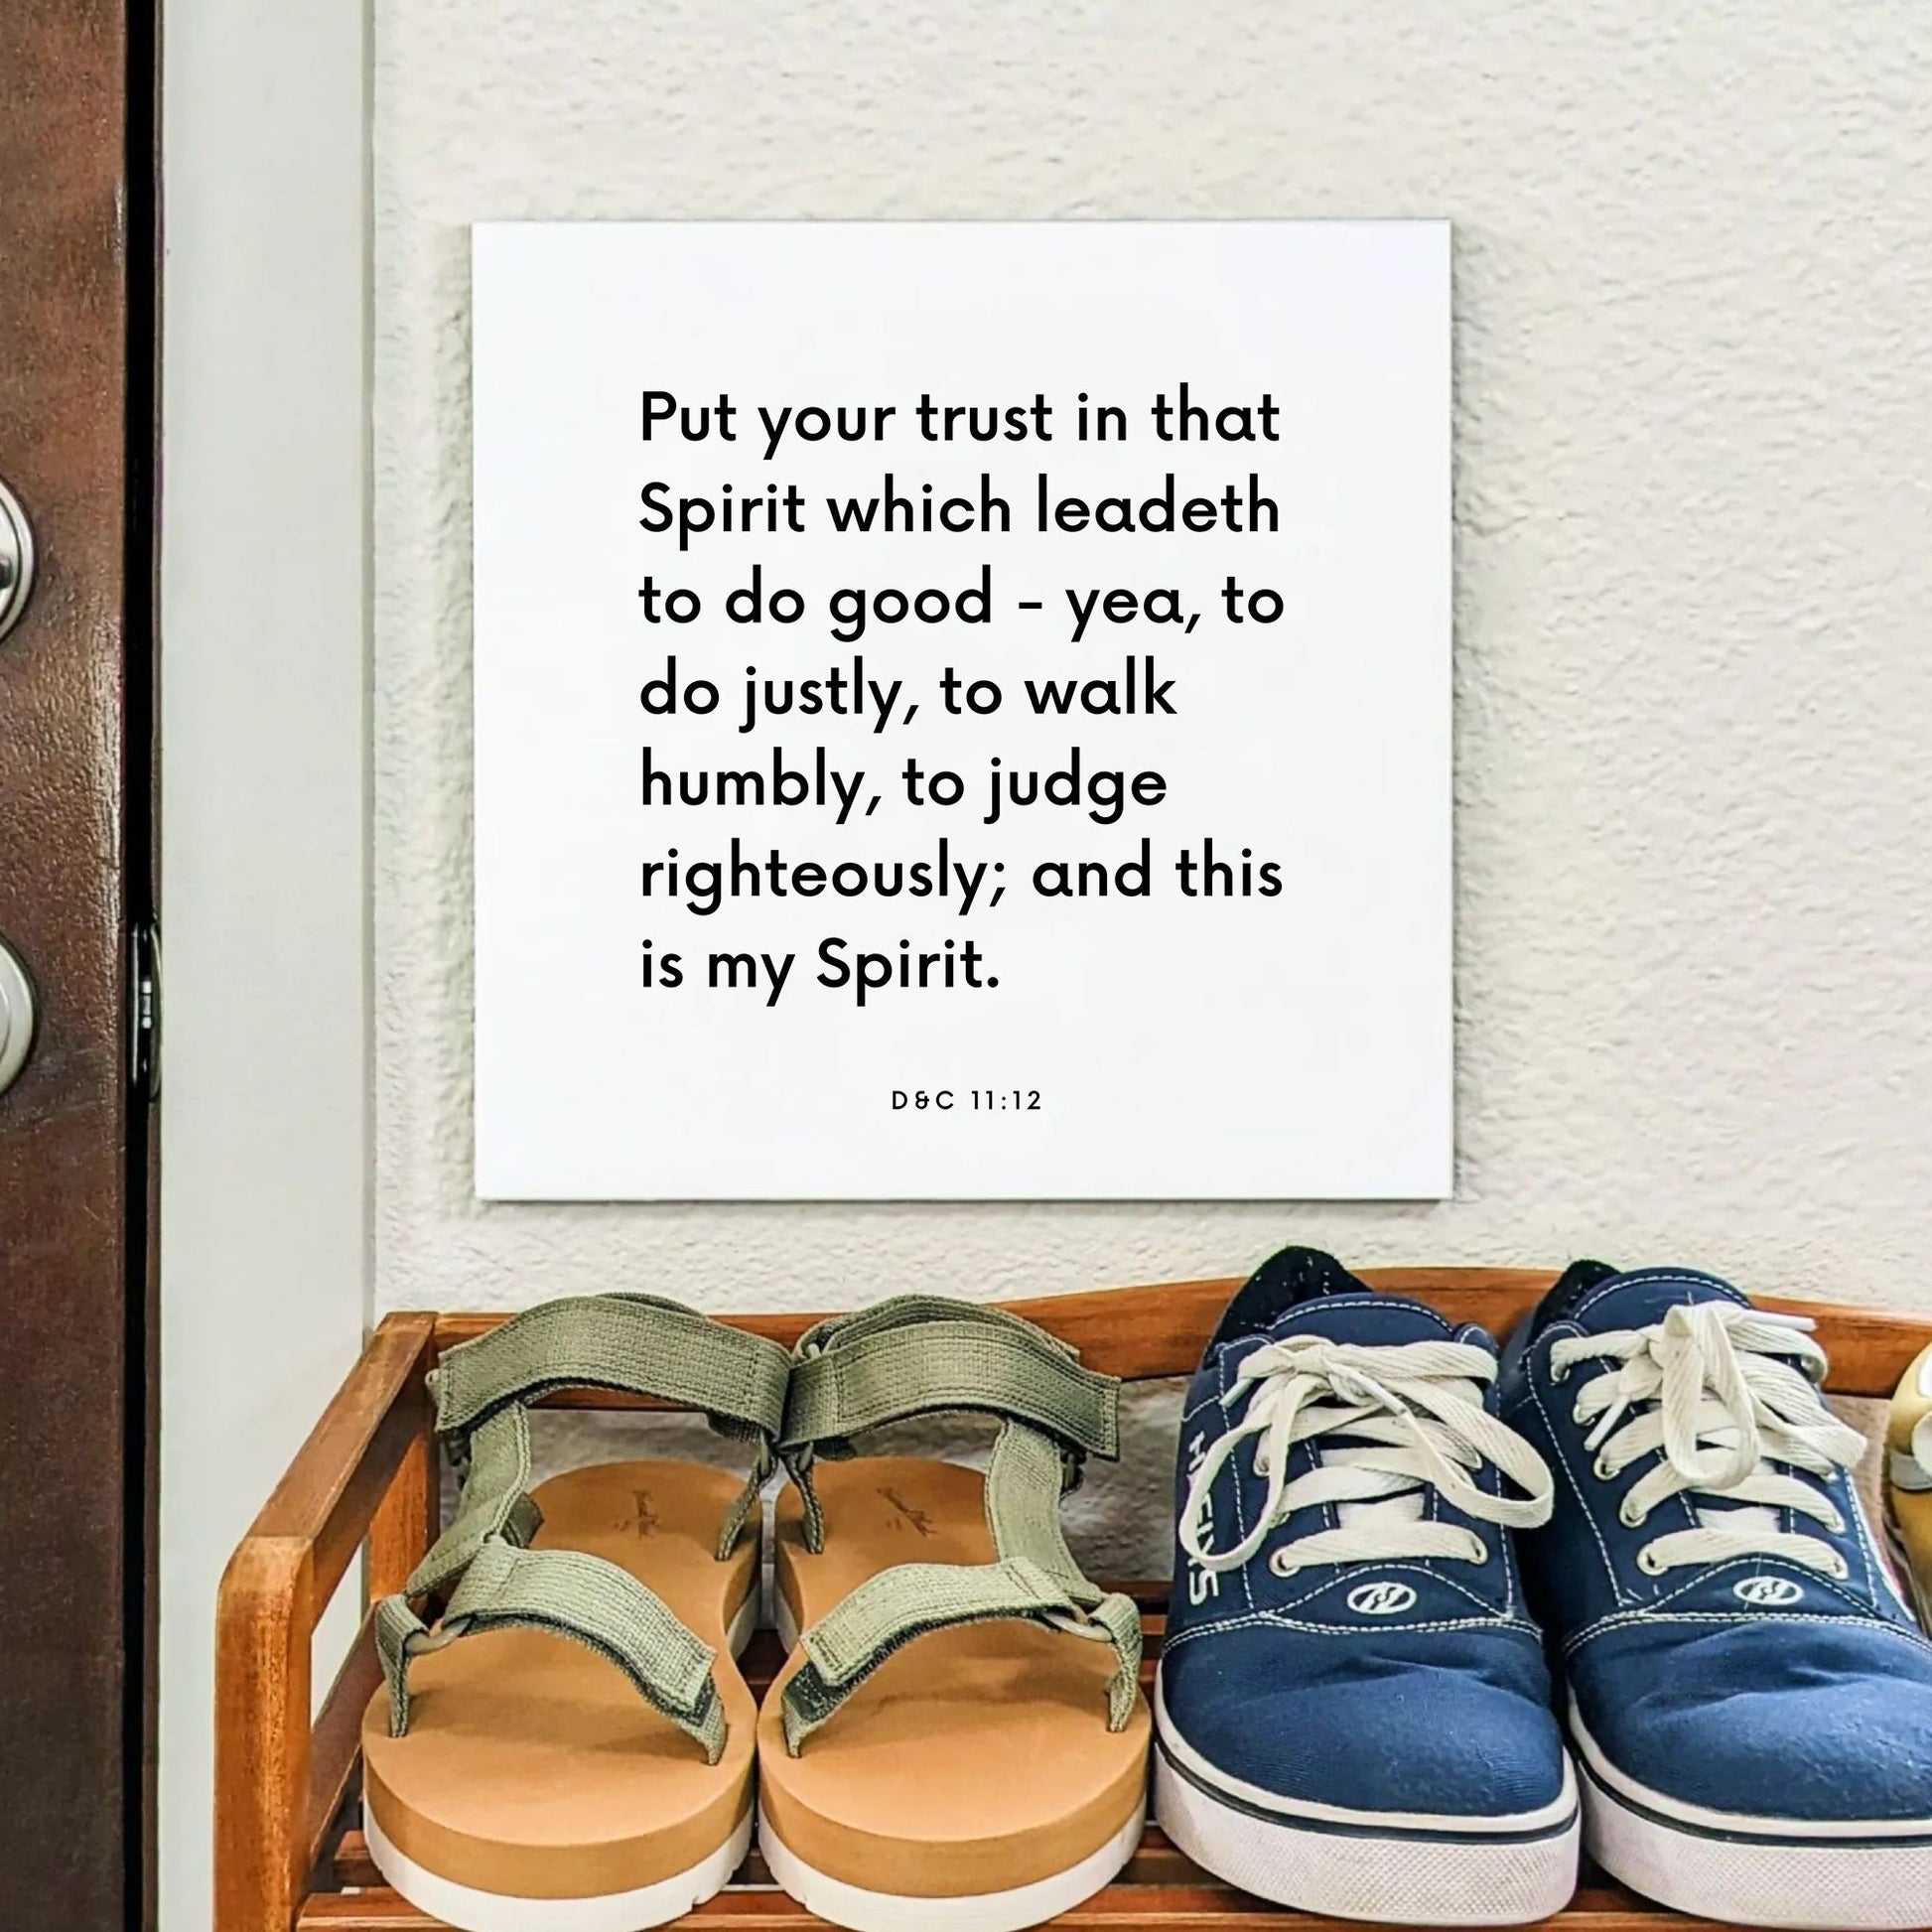 Shoes mouting of the scripture tile for D&C 11:12 - "Put your trust in that Spirit which leadeth to do good"